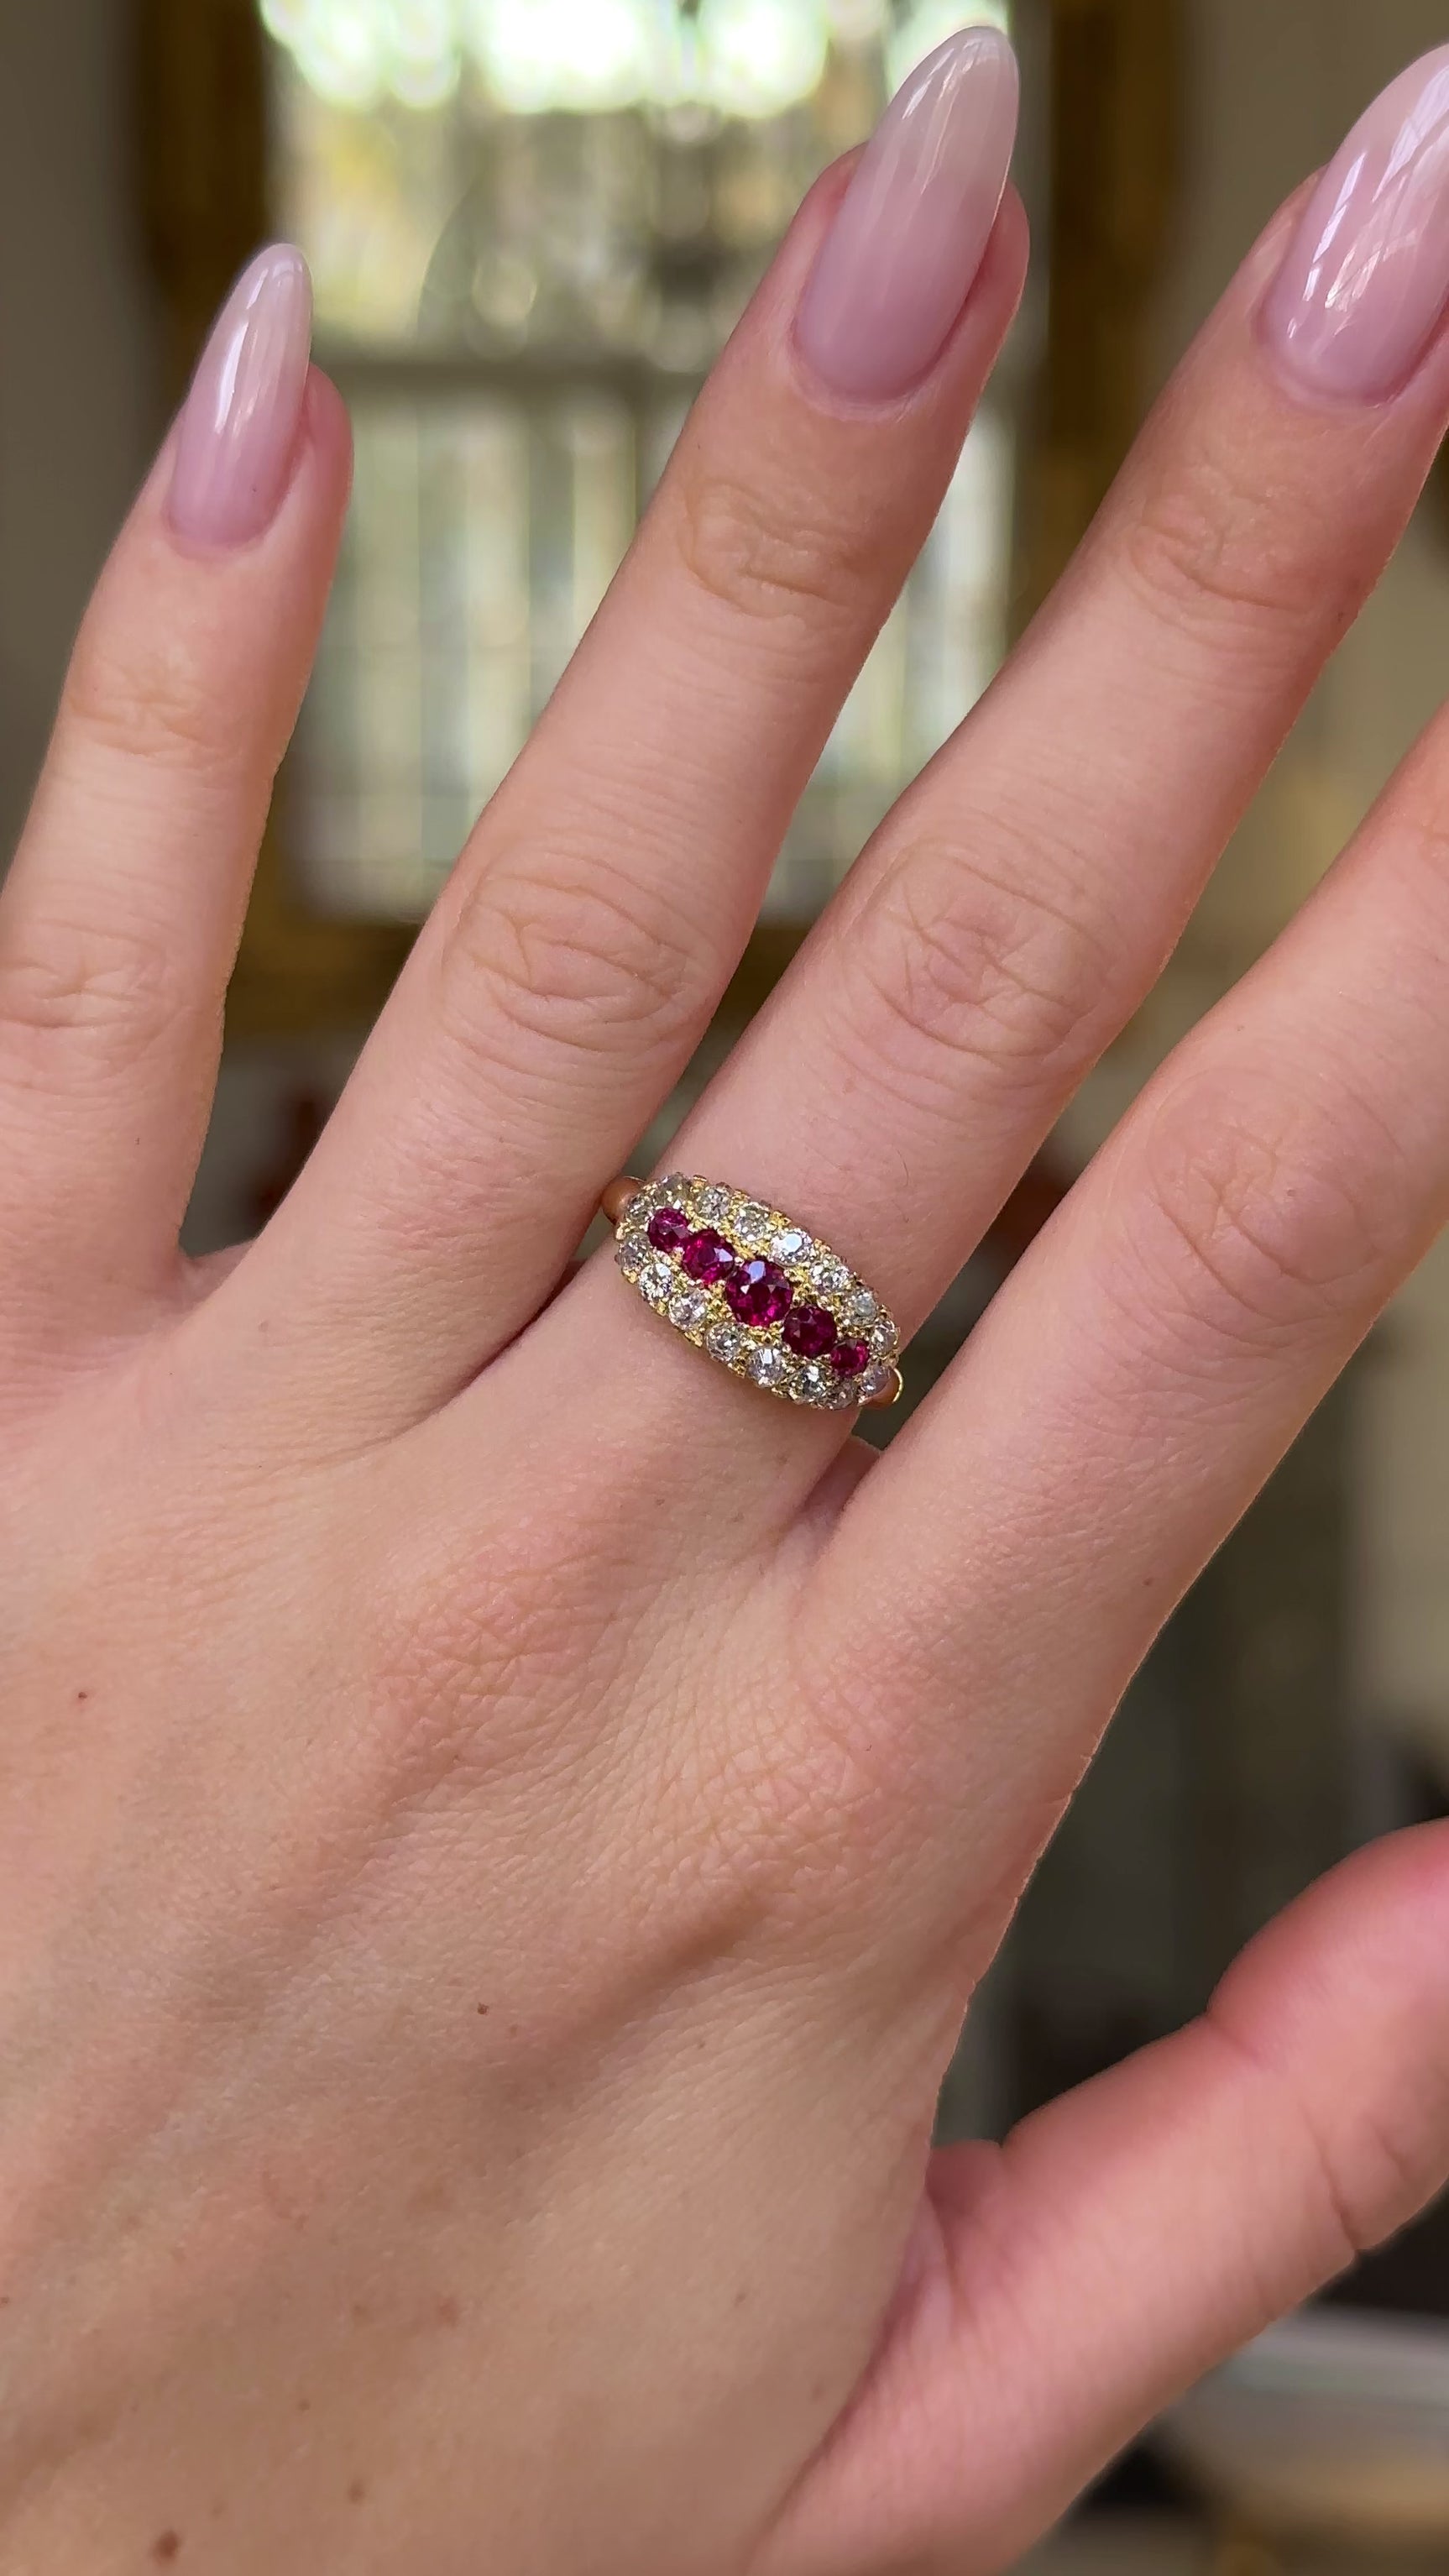 Ruby and diamond cluster engagement ring worn on hand and moved around to give perspective.